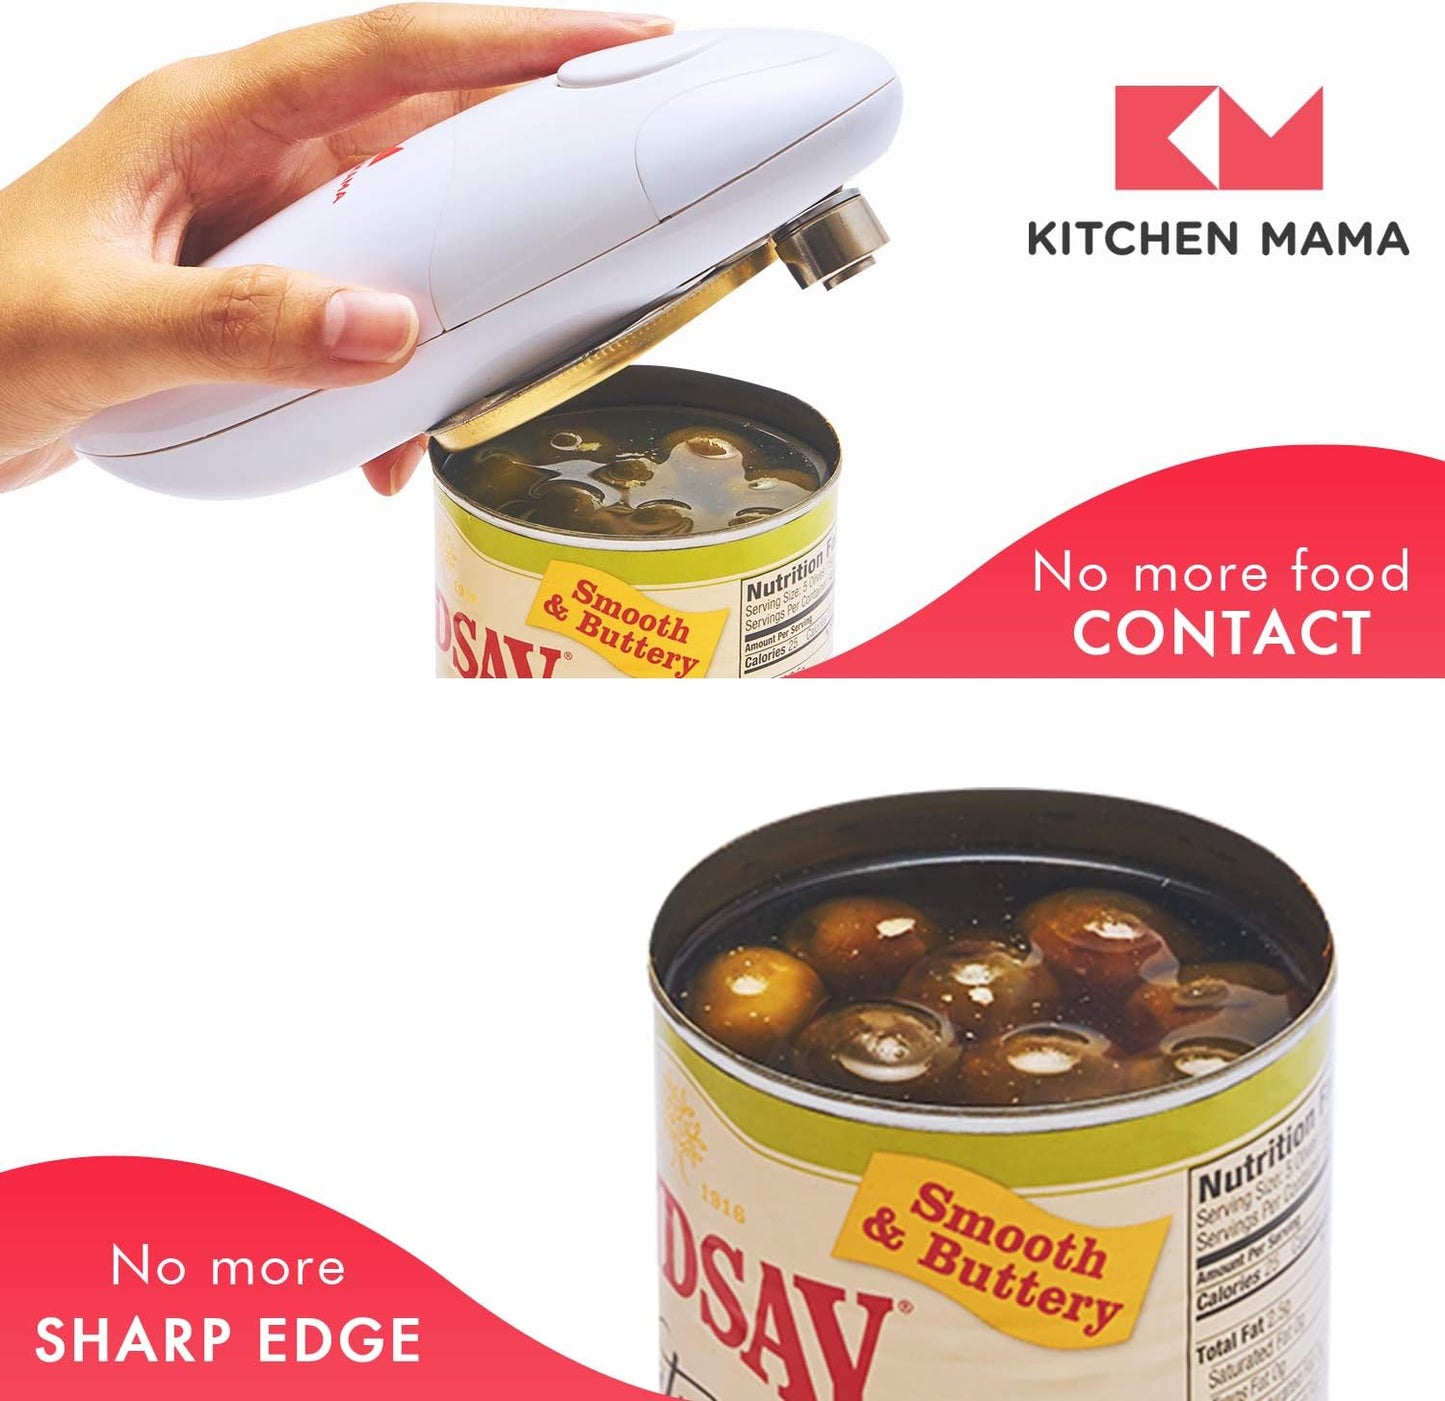 Uniites™, Kitchen Mama Auto Electric Can Opener Gift Idea: Open Your Cans with A Simple Press of Button - Automatic, Hands Free, Smooth Edge, Food-Safe, Battery Operated, YES YOU CAN (Red),  $20.91